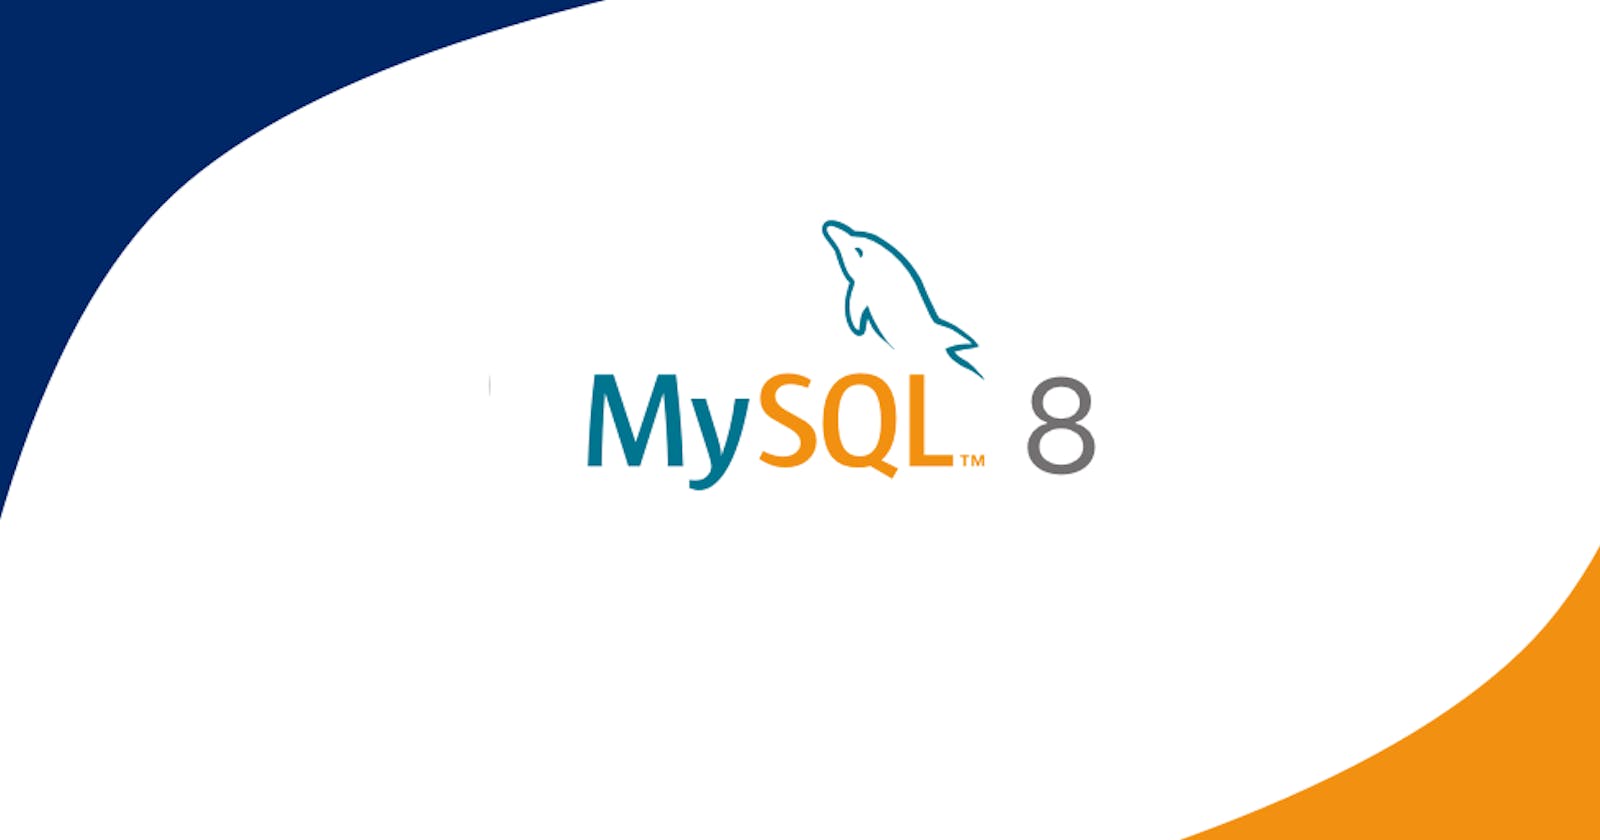 How to solve MySQL 8 error "Authentication plugin 'caching_sha2_password' cannot be loaded"